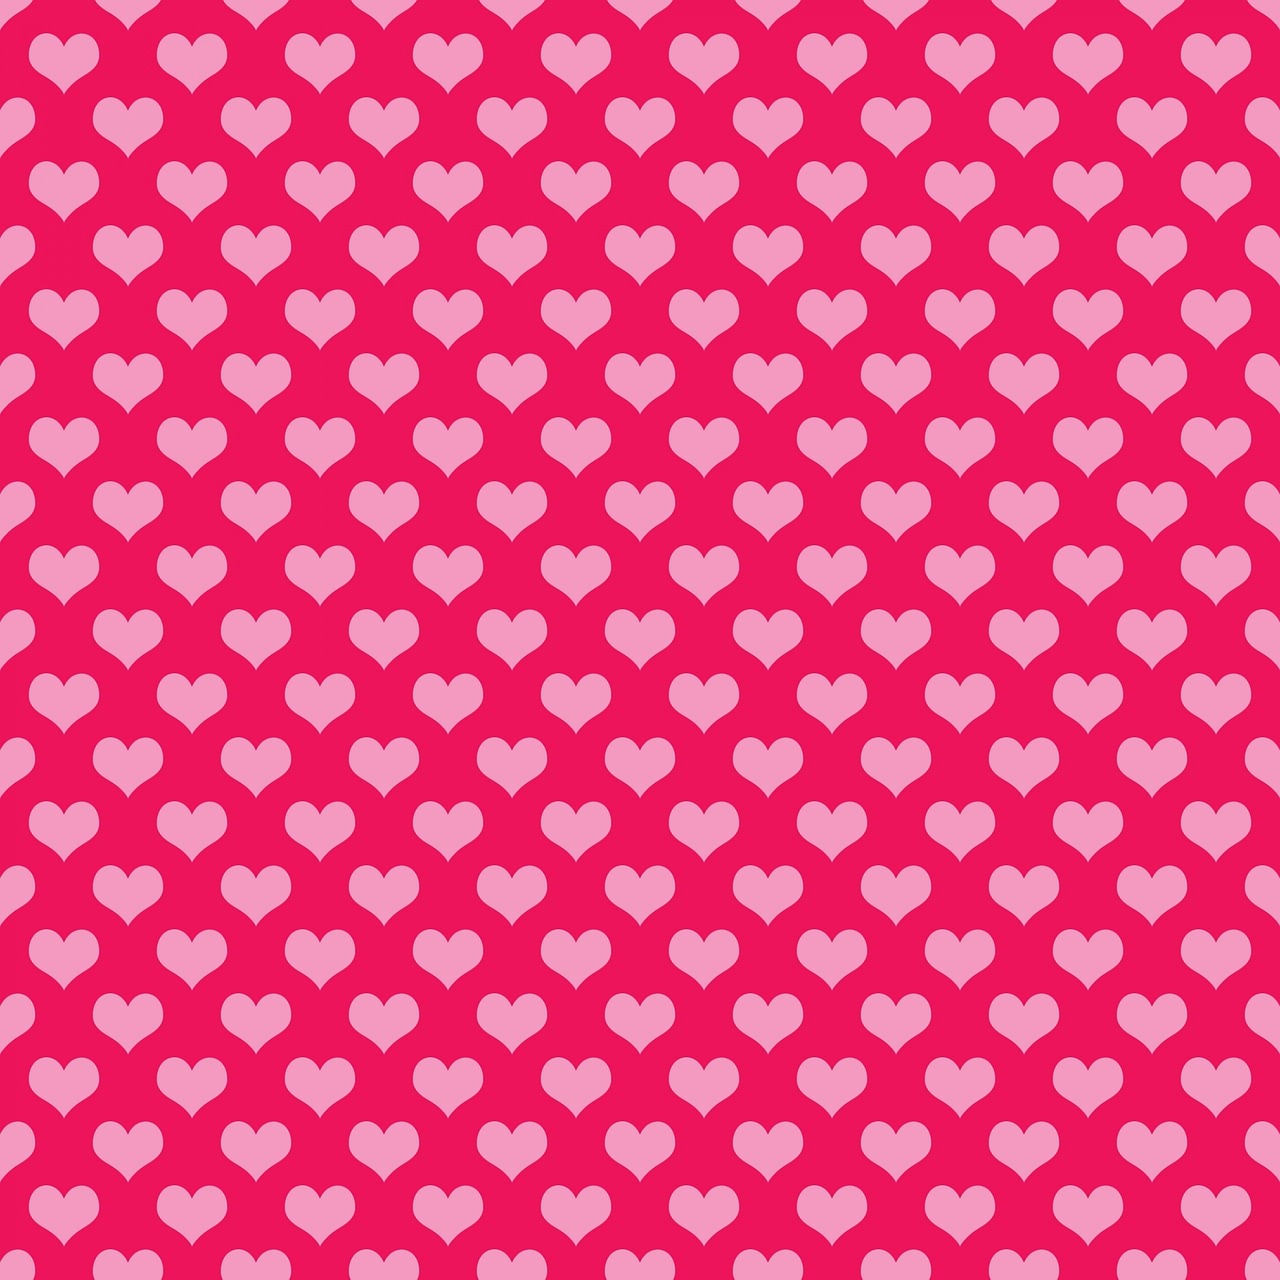 hearts background pink free photo